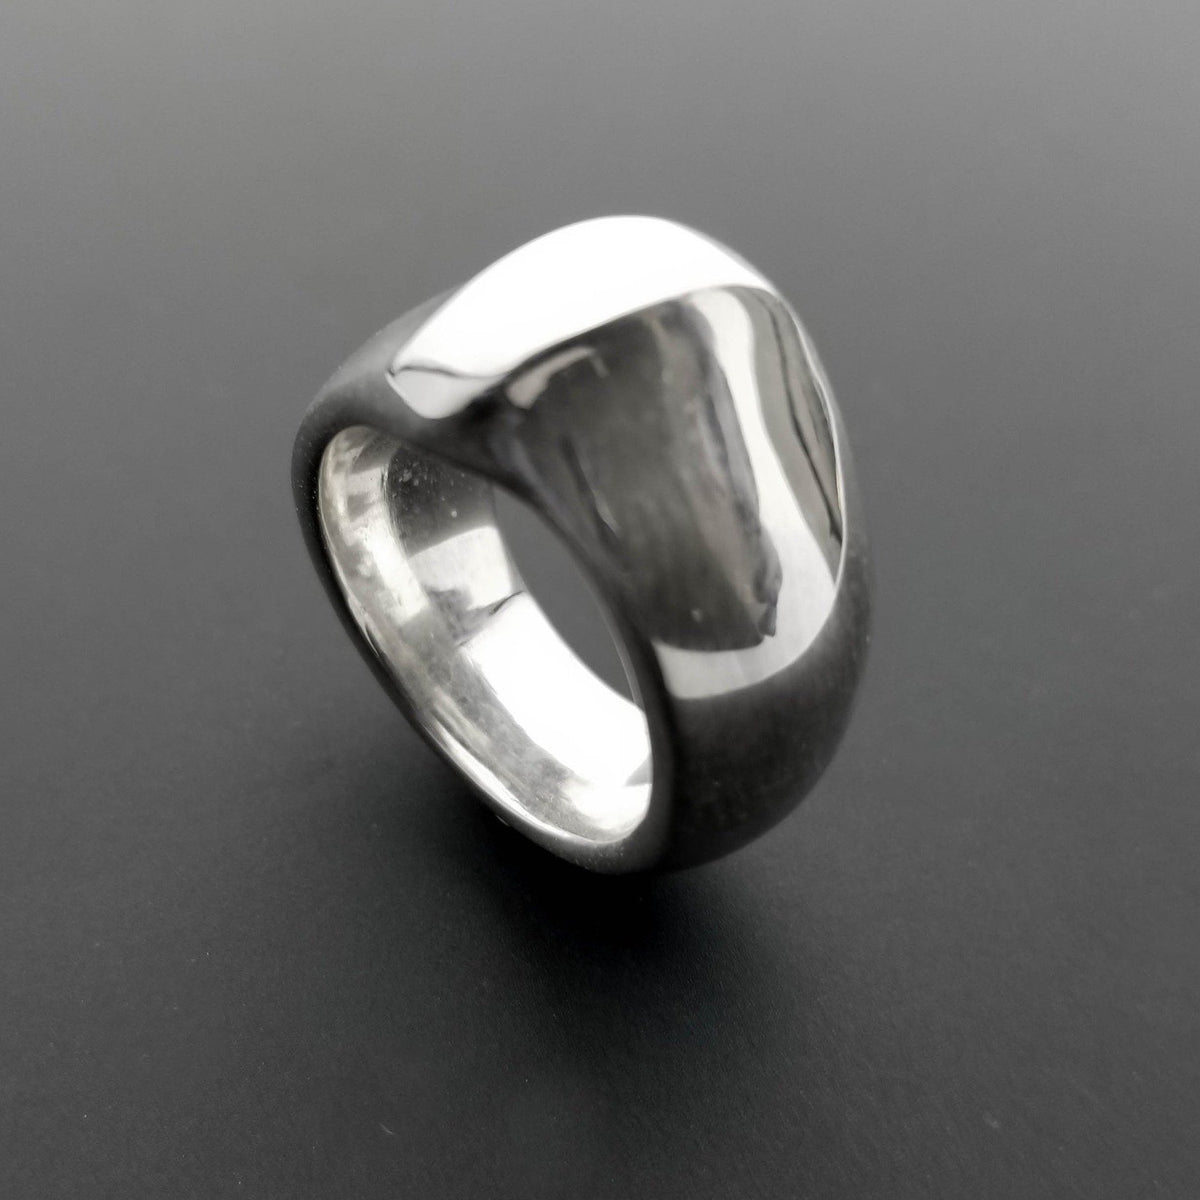 Large bold silver ring called love